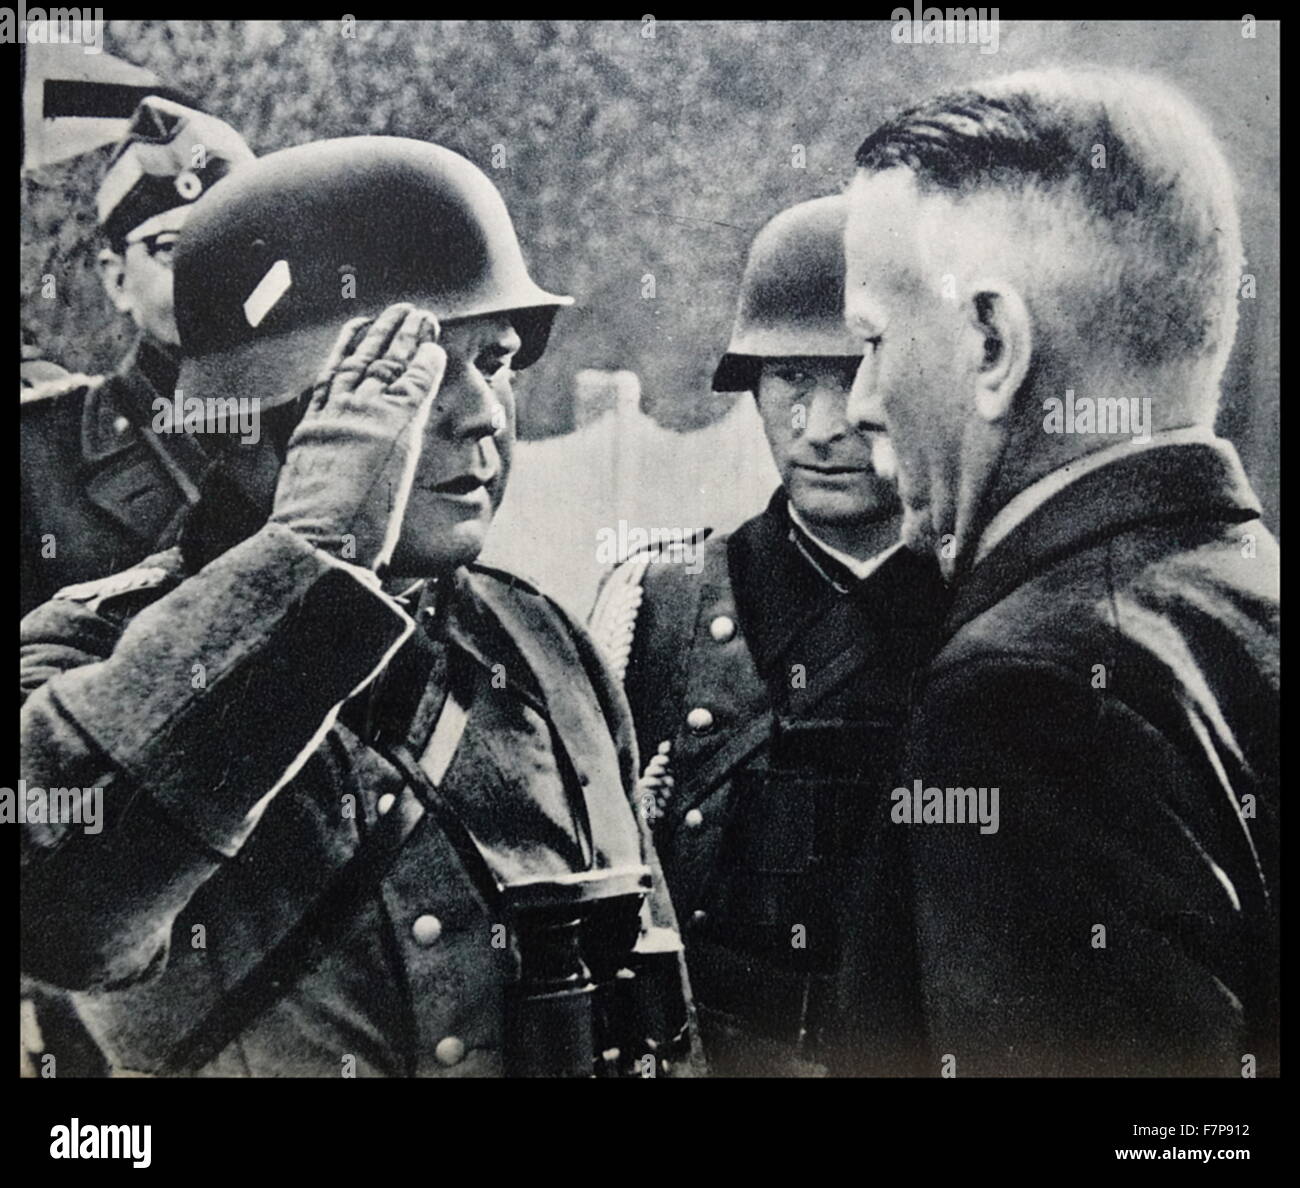 A German Nazi officer informing the Danish General Jakobson on the conclusion of the negotiations with the Danish Government. During the invasion of Denmark, during World War II, 1940. Stock Photo